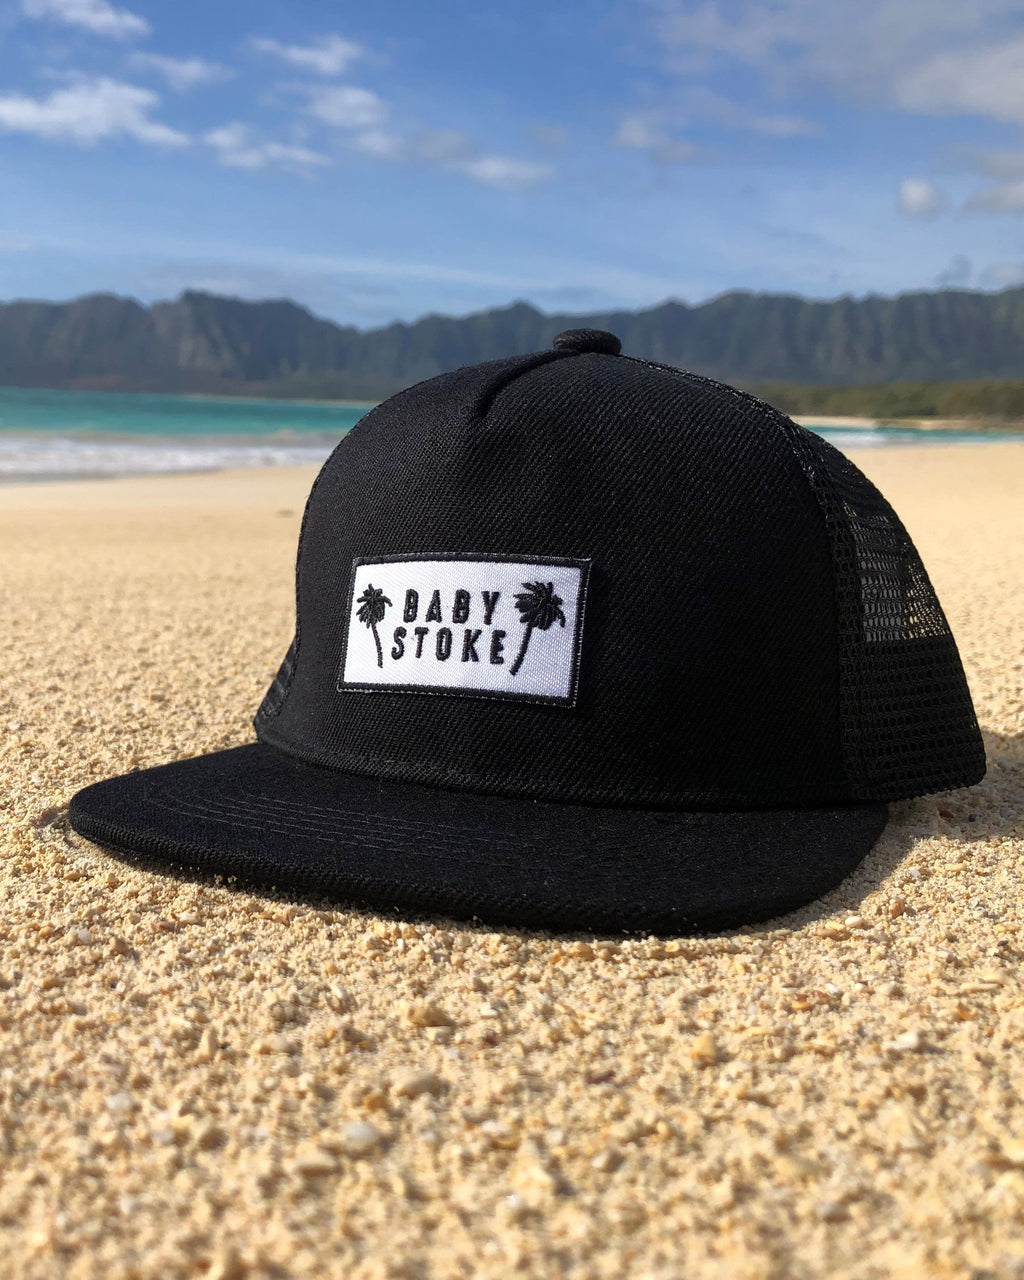 Black Palm tree trucker hat for toddlers on the beach in the sand in hawaii on an adventure provides protection from the sun copy